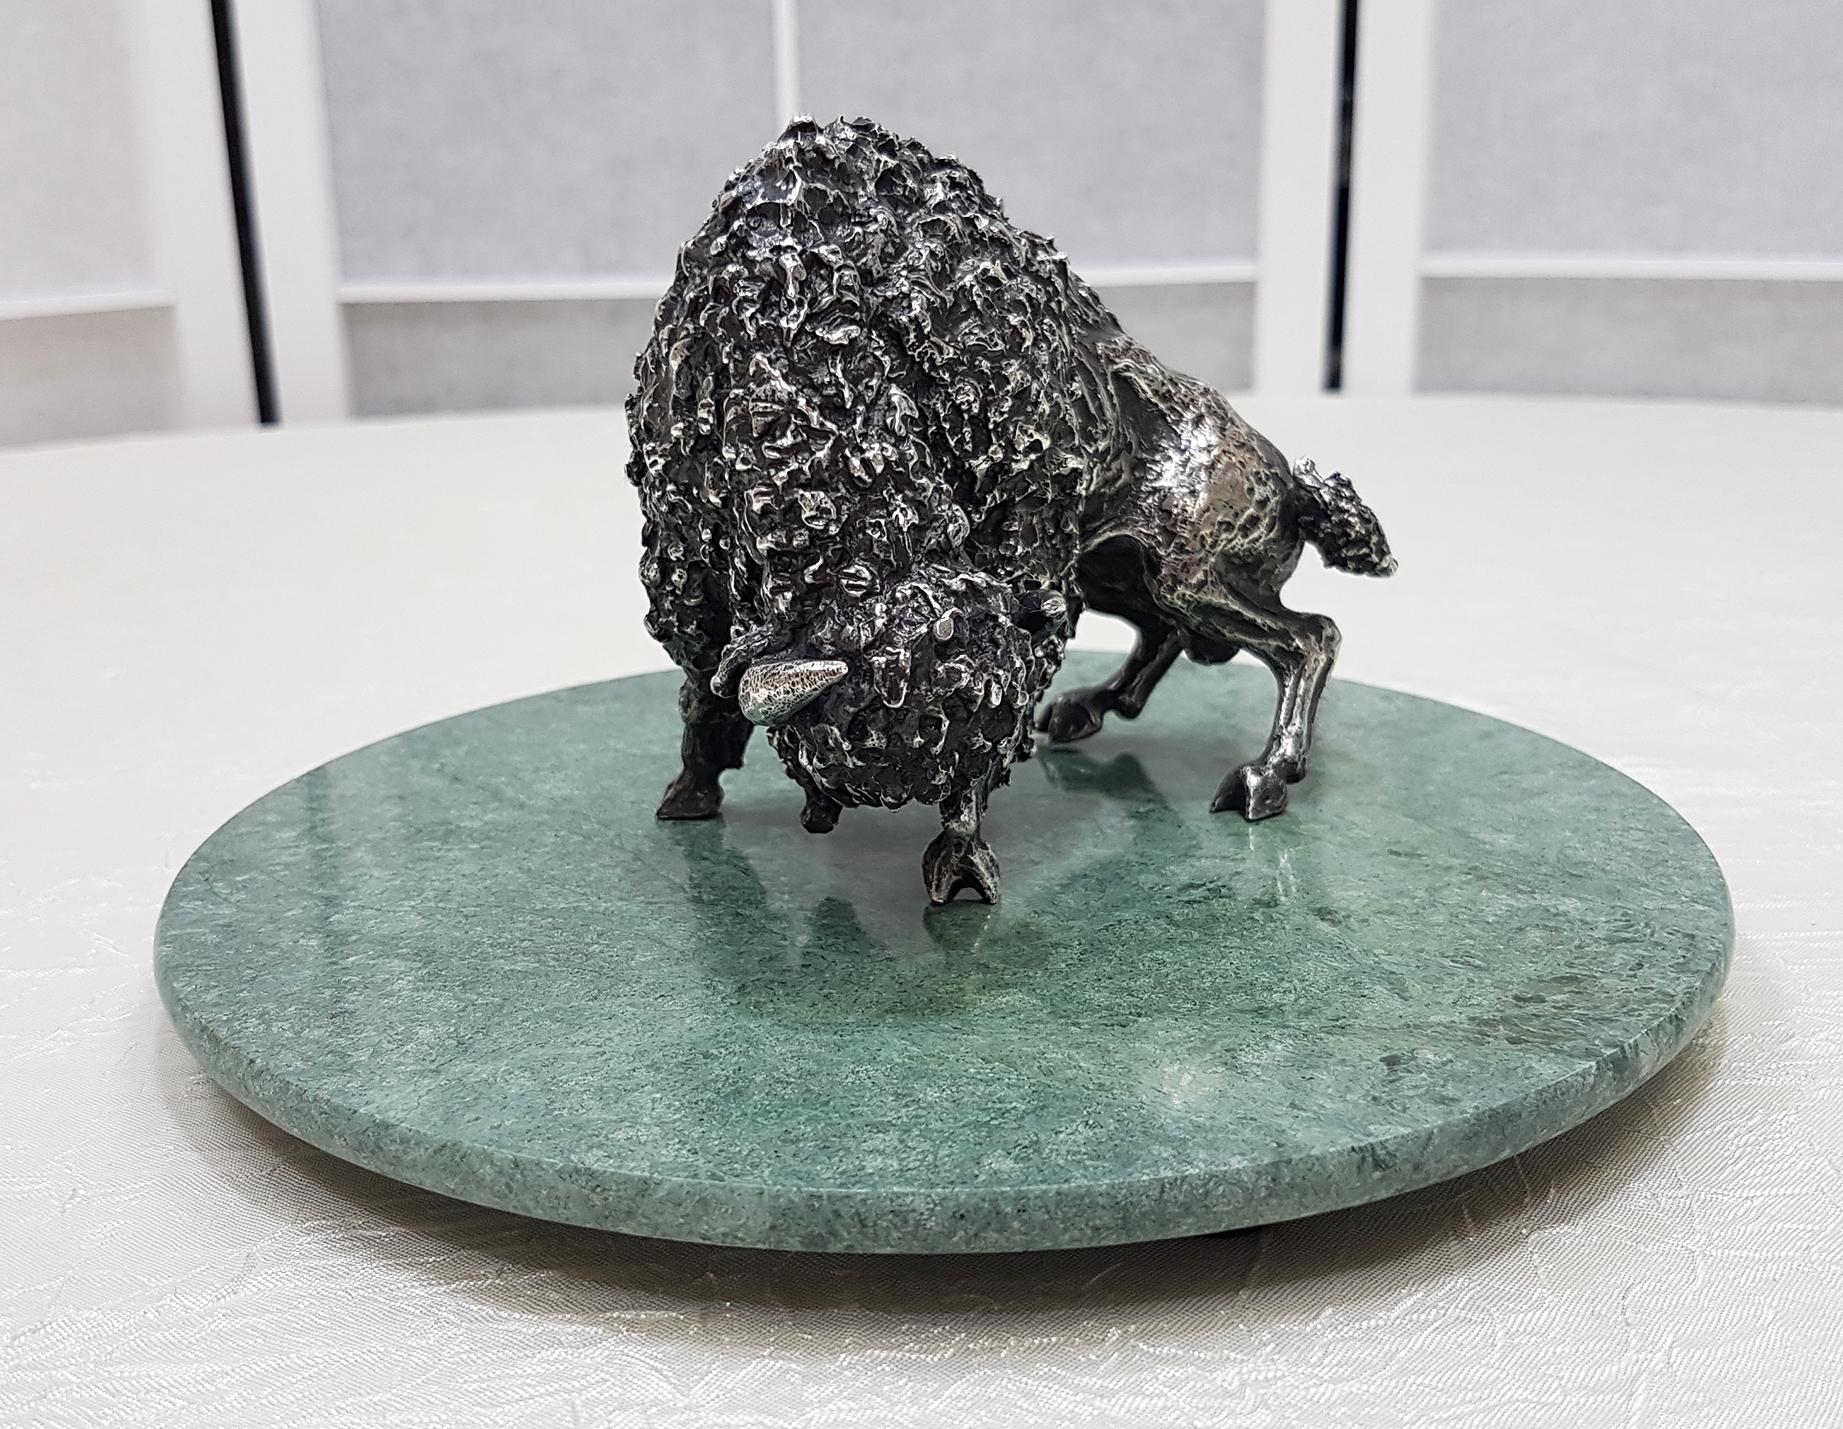 Bison in solid silver made in Arezzo, Italy in the 1950s of the last century by L'etruria Oro di Garzi Marcello.
The sculpture was made in 